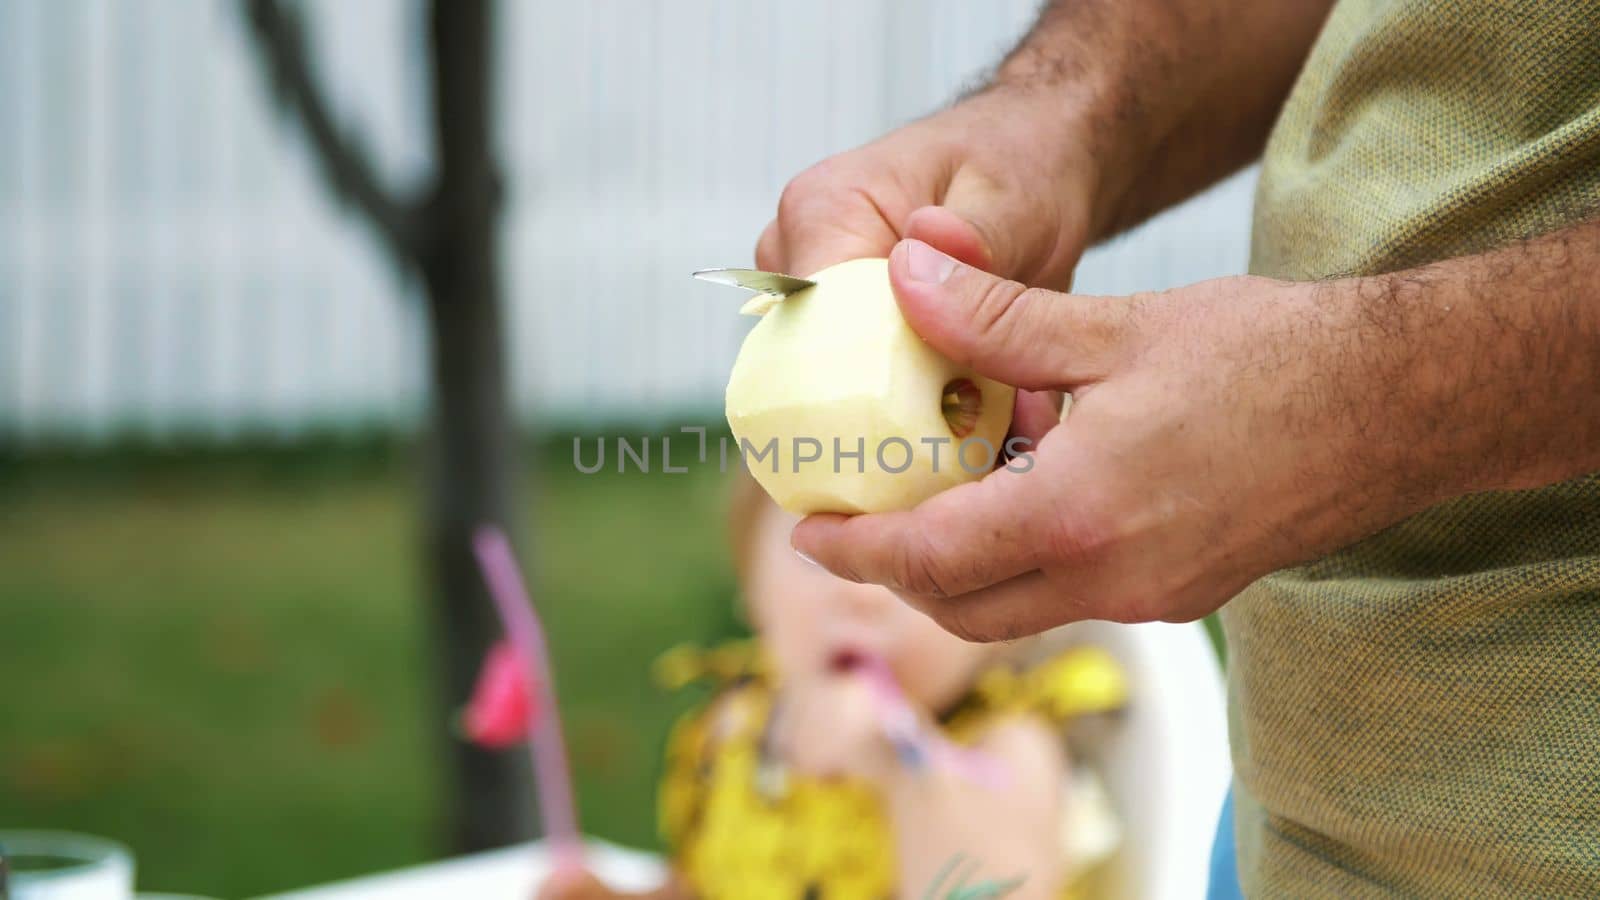 summer, in the garden, slow motion, close-up, men's hands, peel an apple with a knife, cut the peel. by djtreneryay